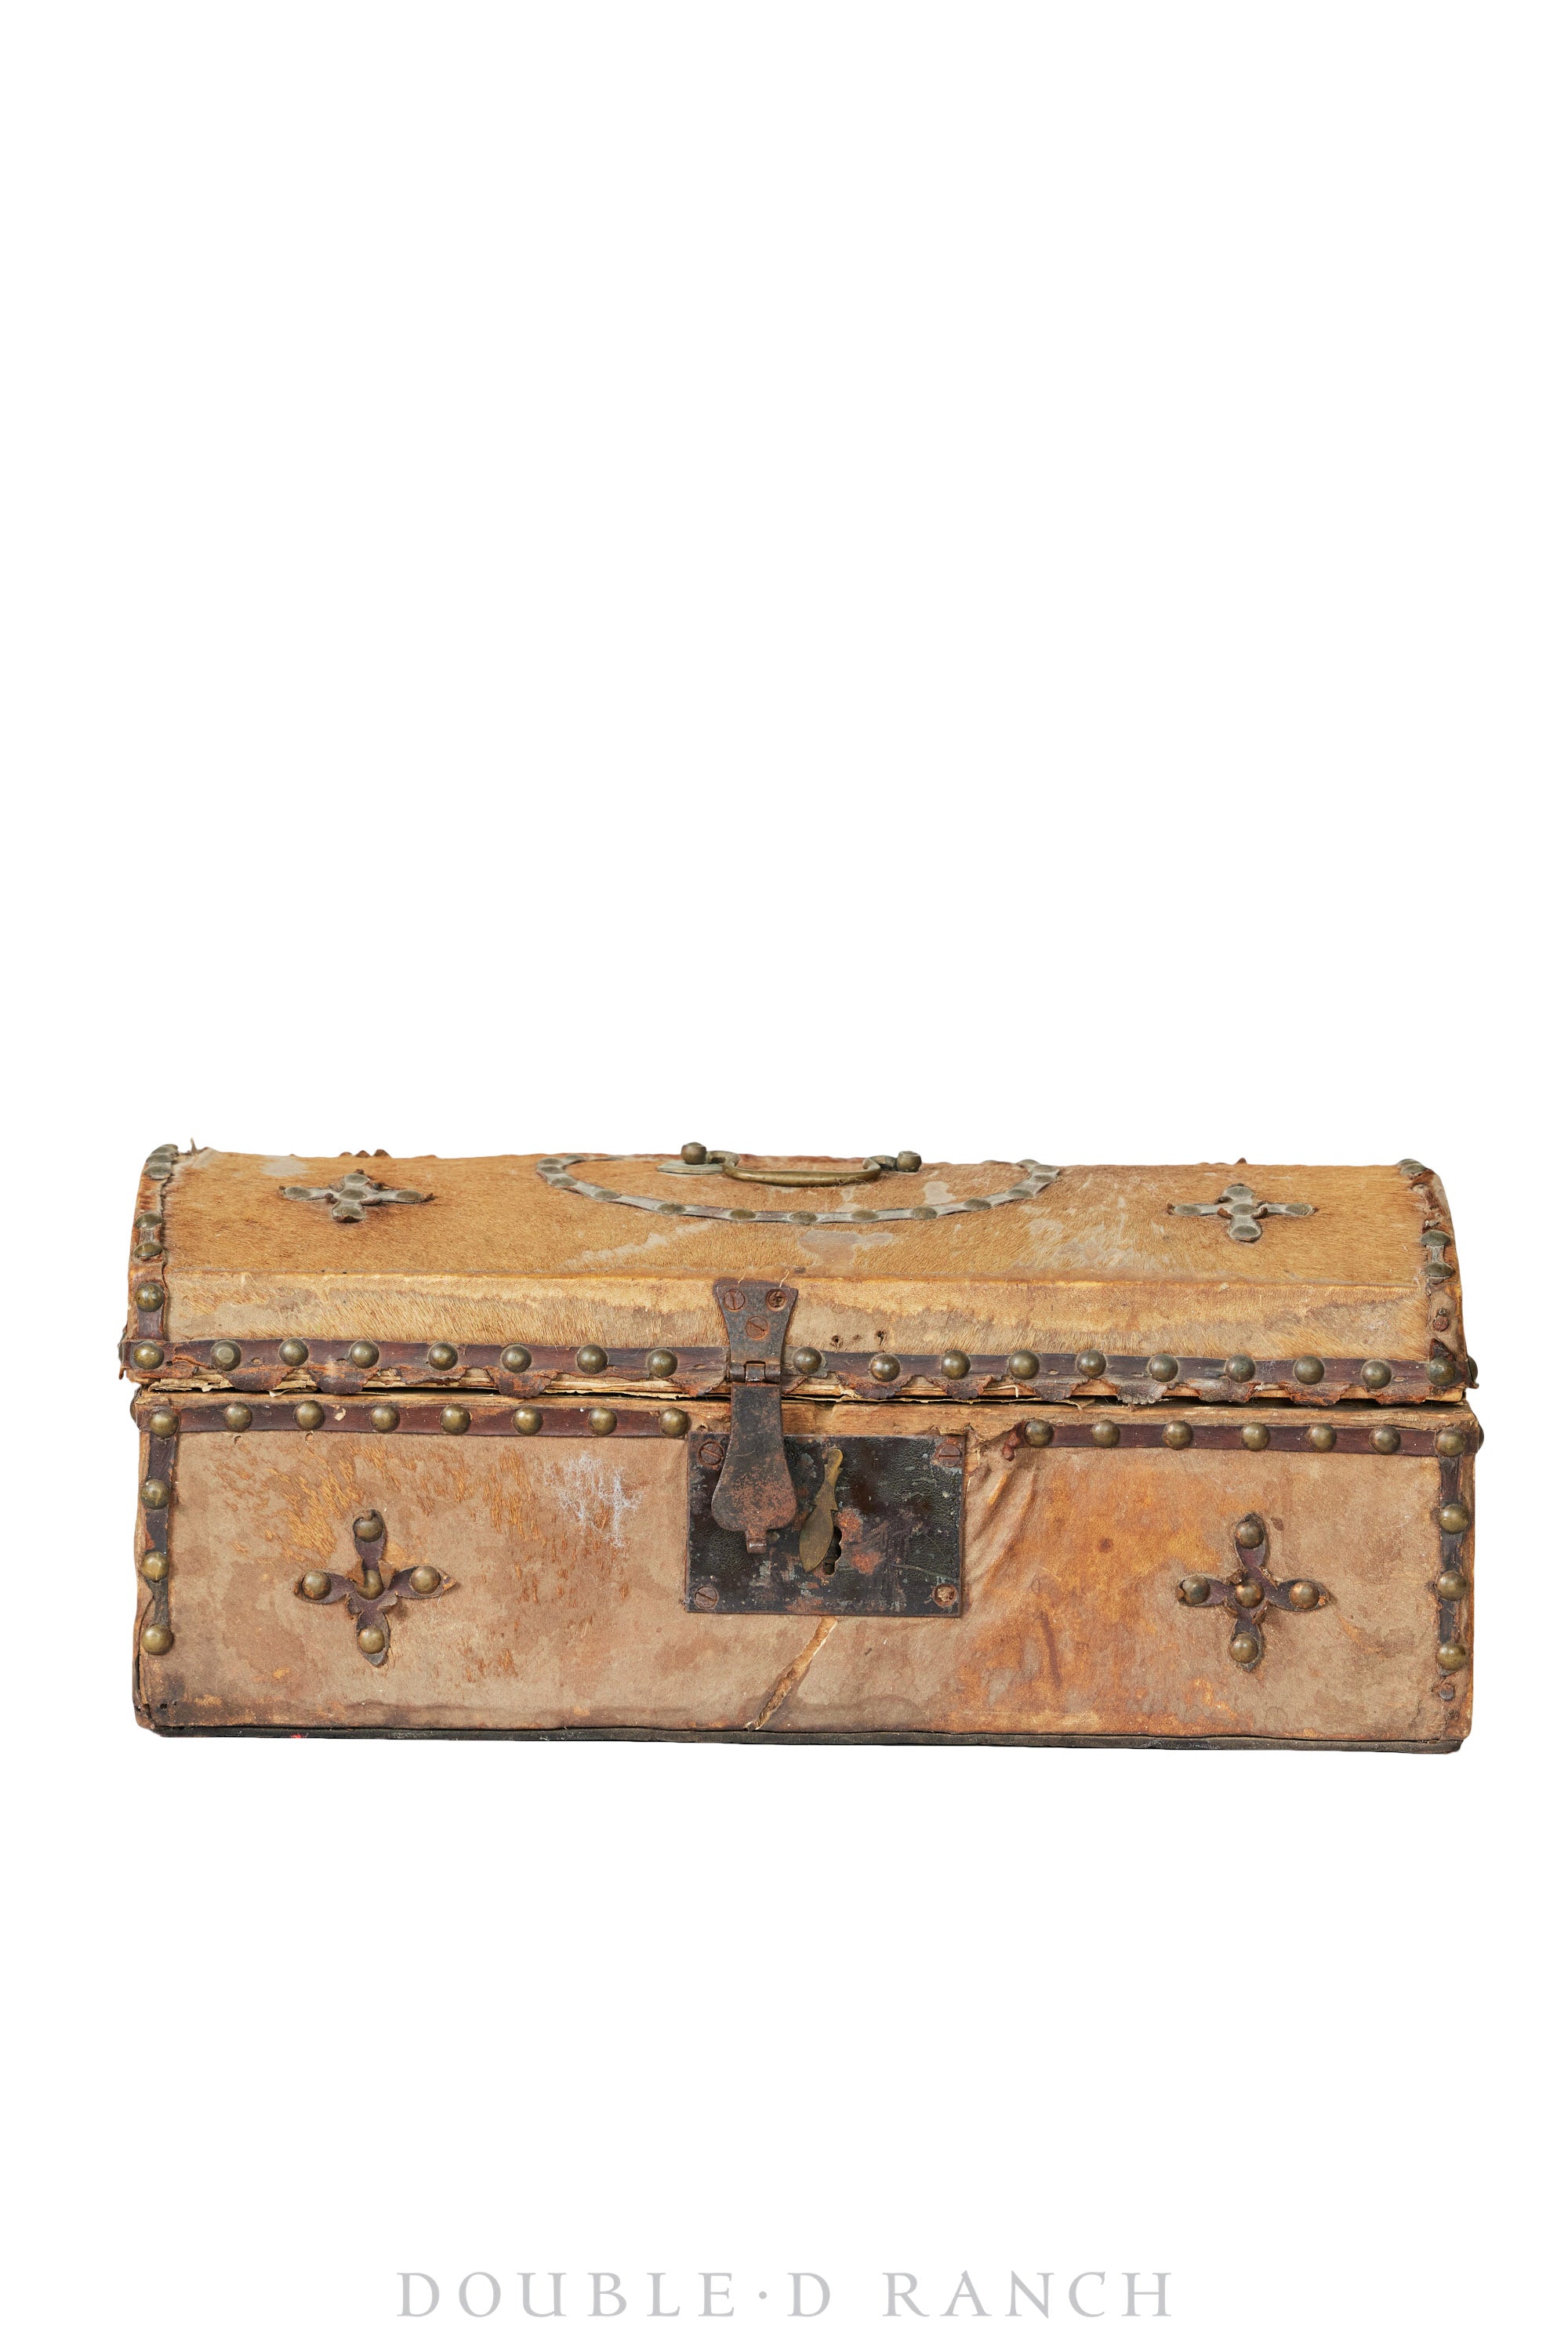 Home, Furniture, Trunk, Stagecoach, Hide Covered, Studded, Vintage 1845, 231